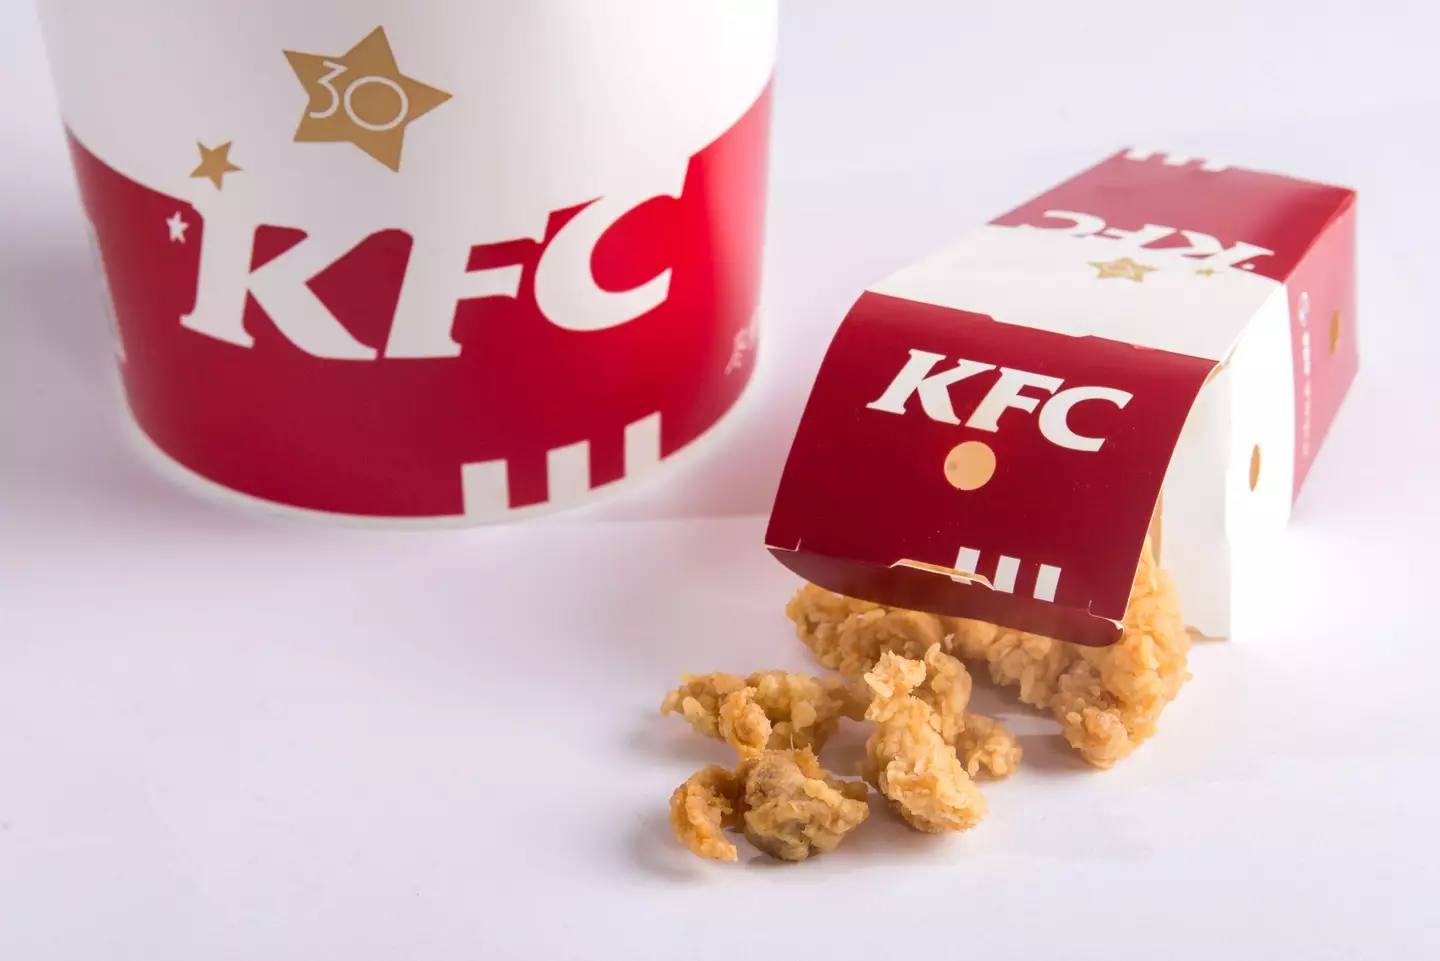 Another bite-sized item by KFC currently on the menu is the chain's popcorn chicken.